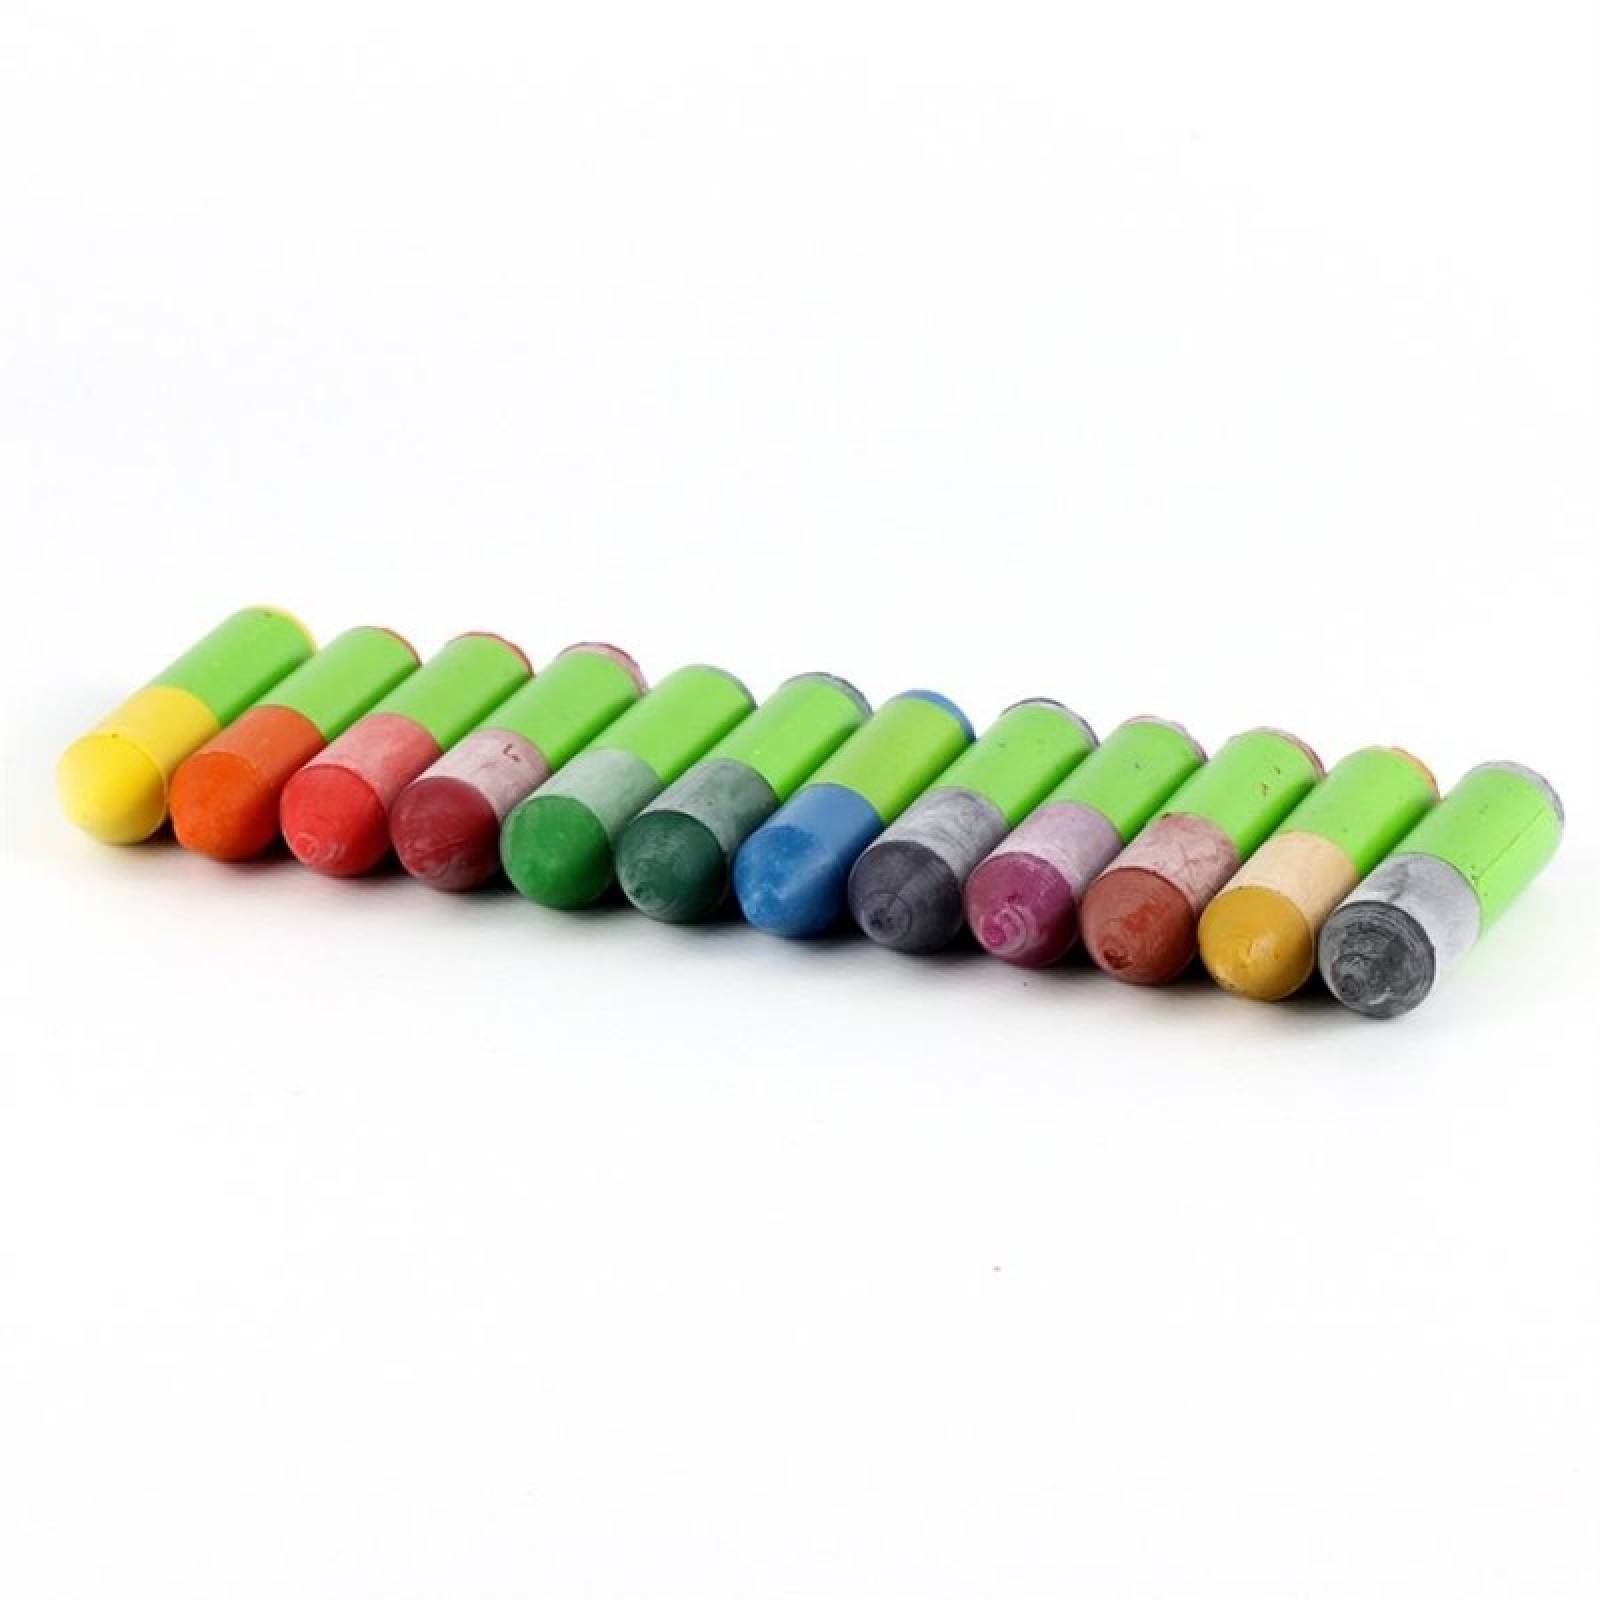 Okonorm Set Of 12 Chubby Wax Crayons In Wooden Box thumbnails